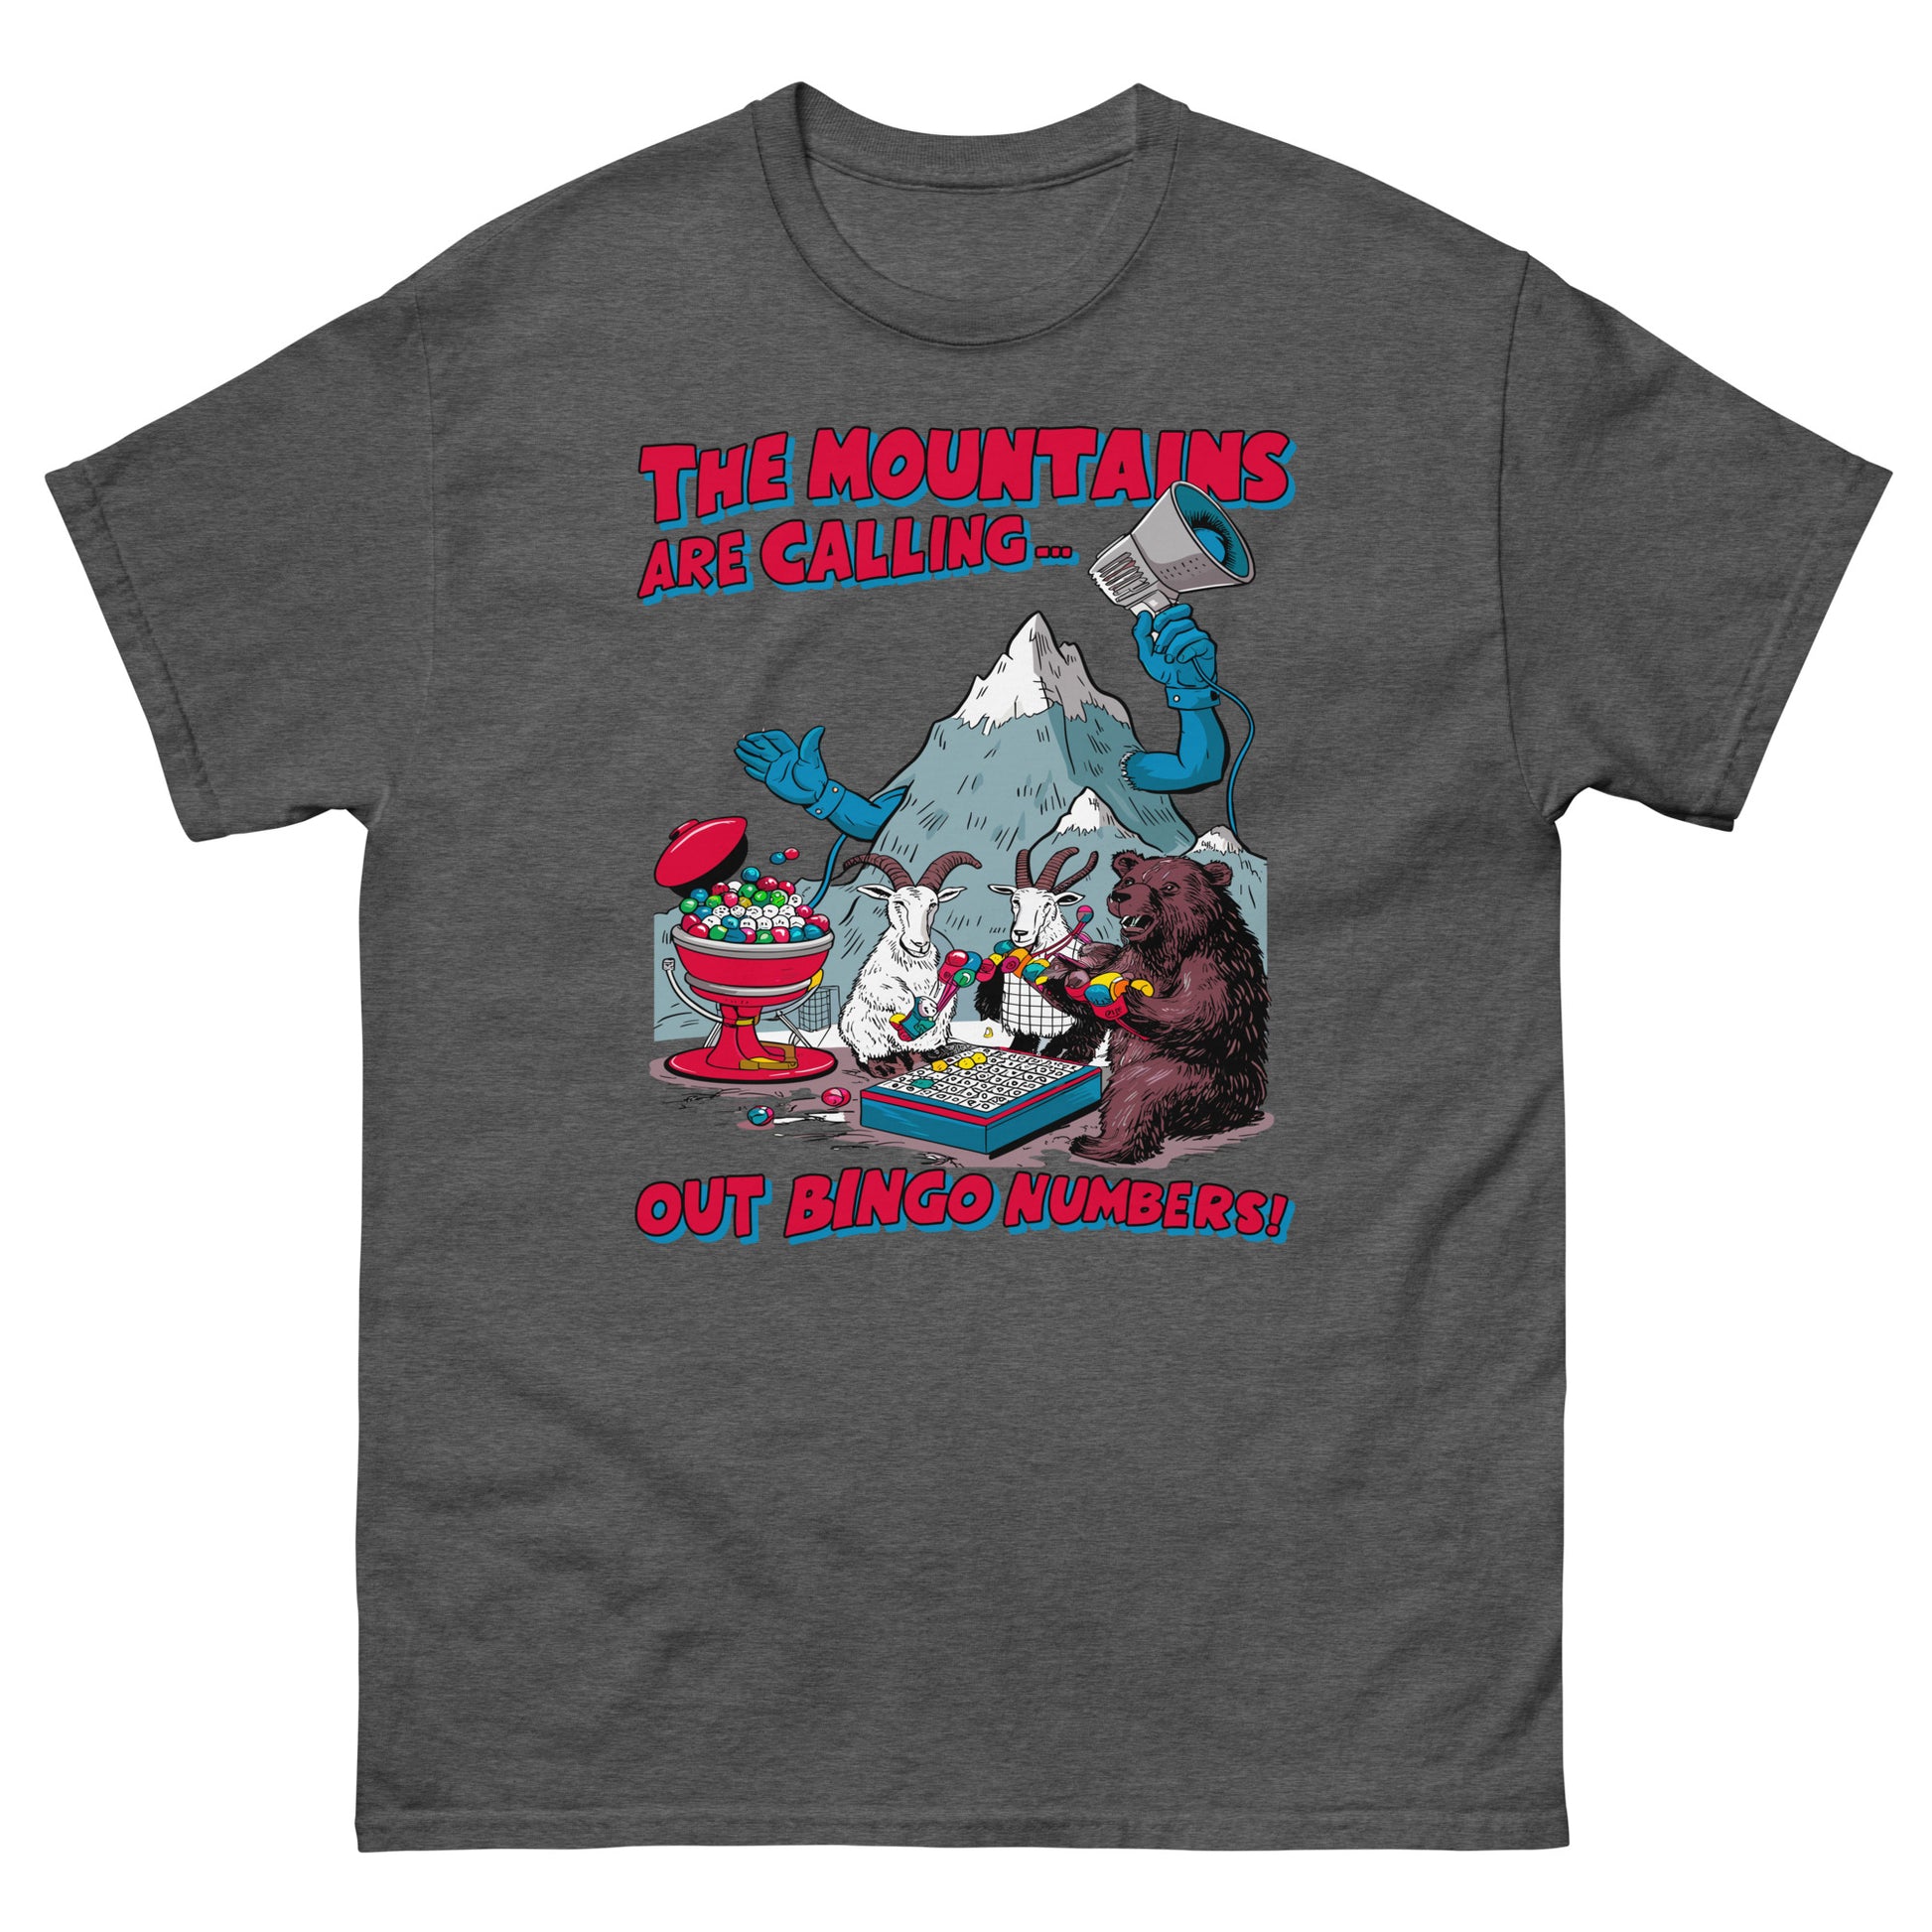 The mountains are calling out bingo numbers design printed on t-shirt by Whistler Shirts